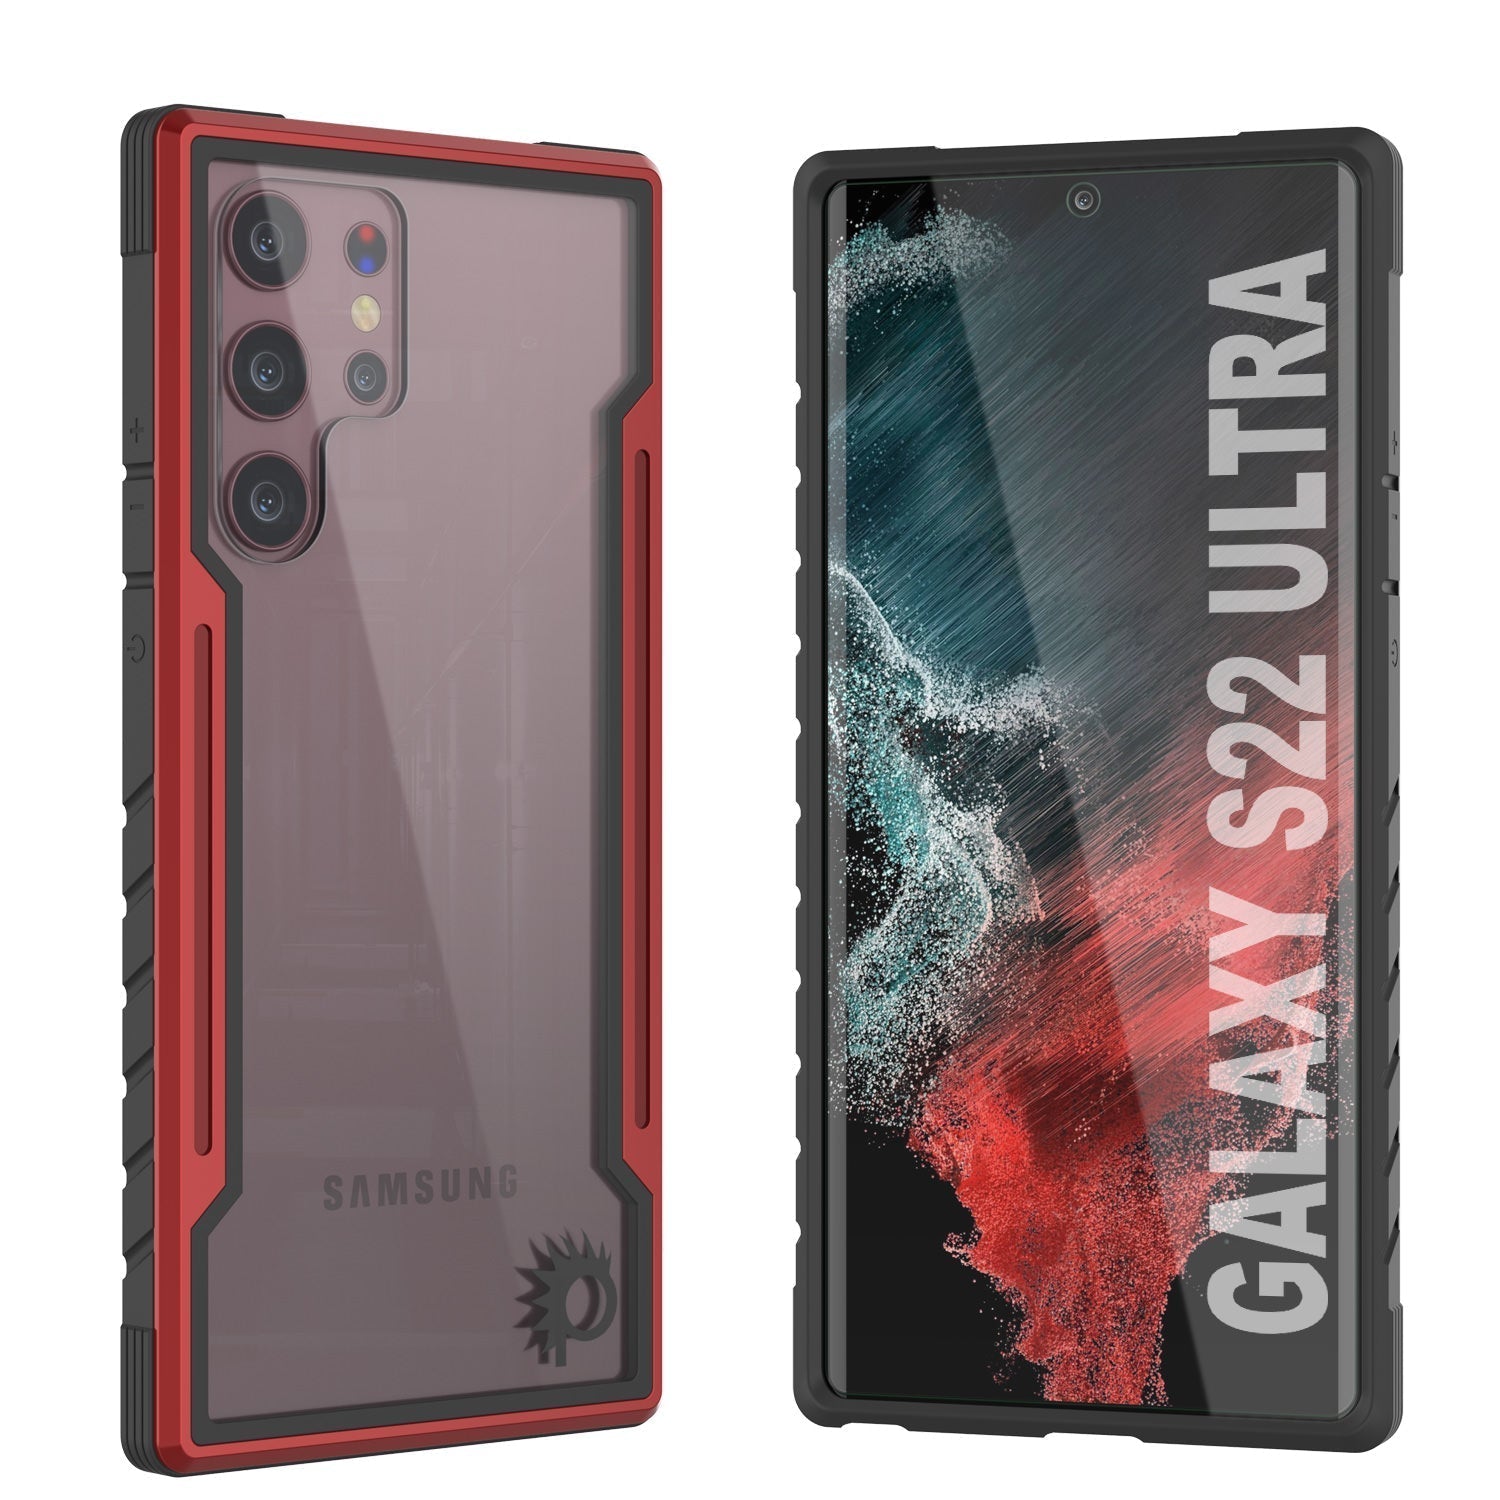 Punkcase S22 Ultra ravenger Case Protective Military Grade Multilayer Cover [Red]